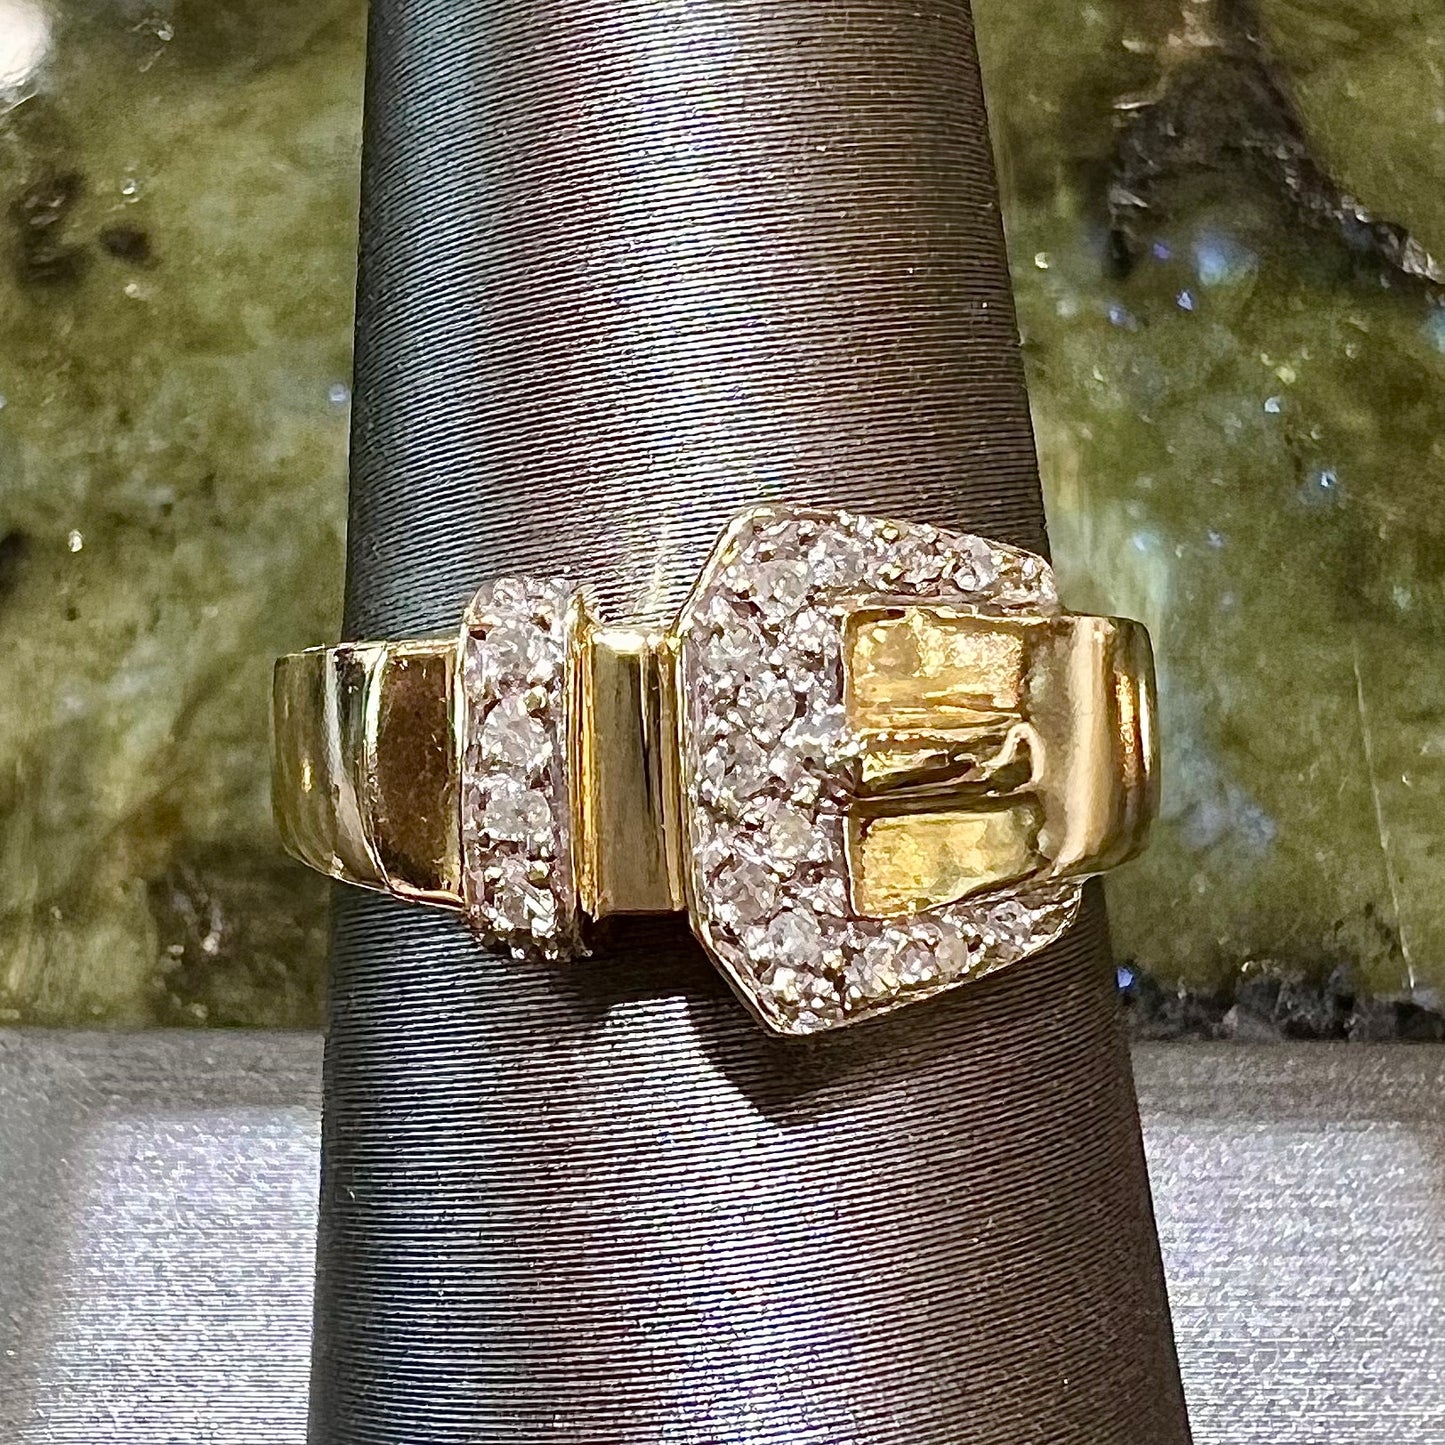 A yellow gold buckle ring set with round diamonds in the buckle.